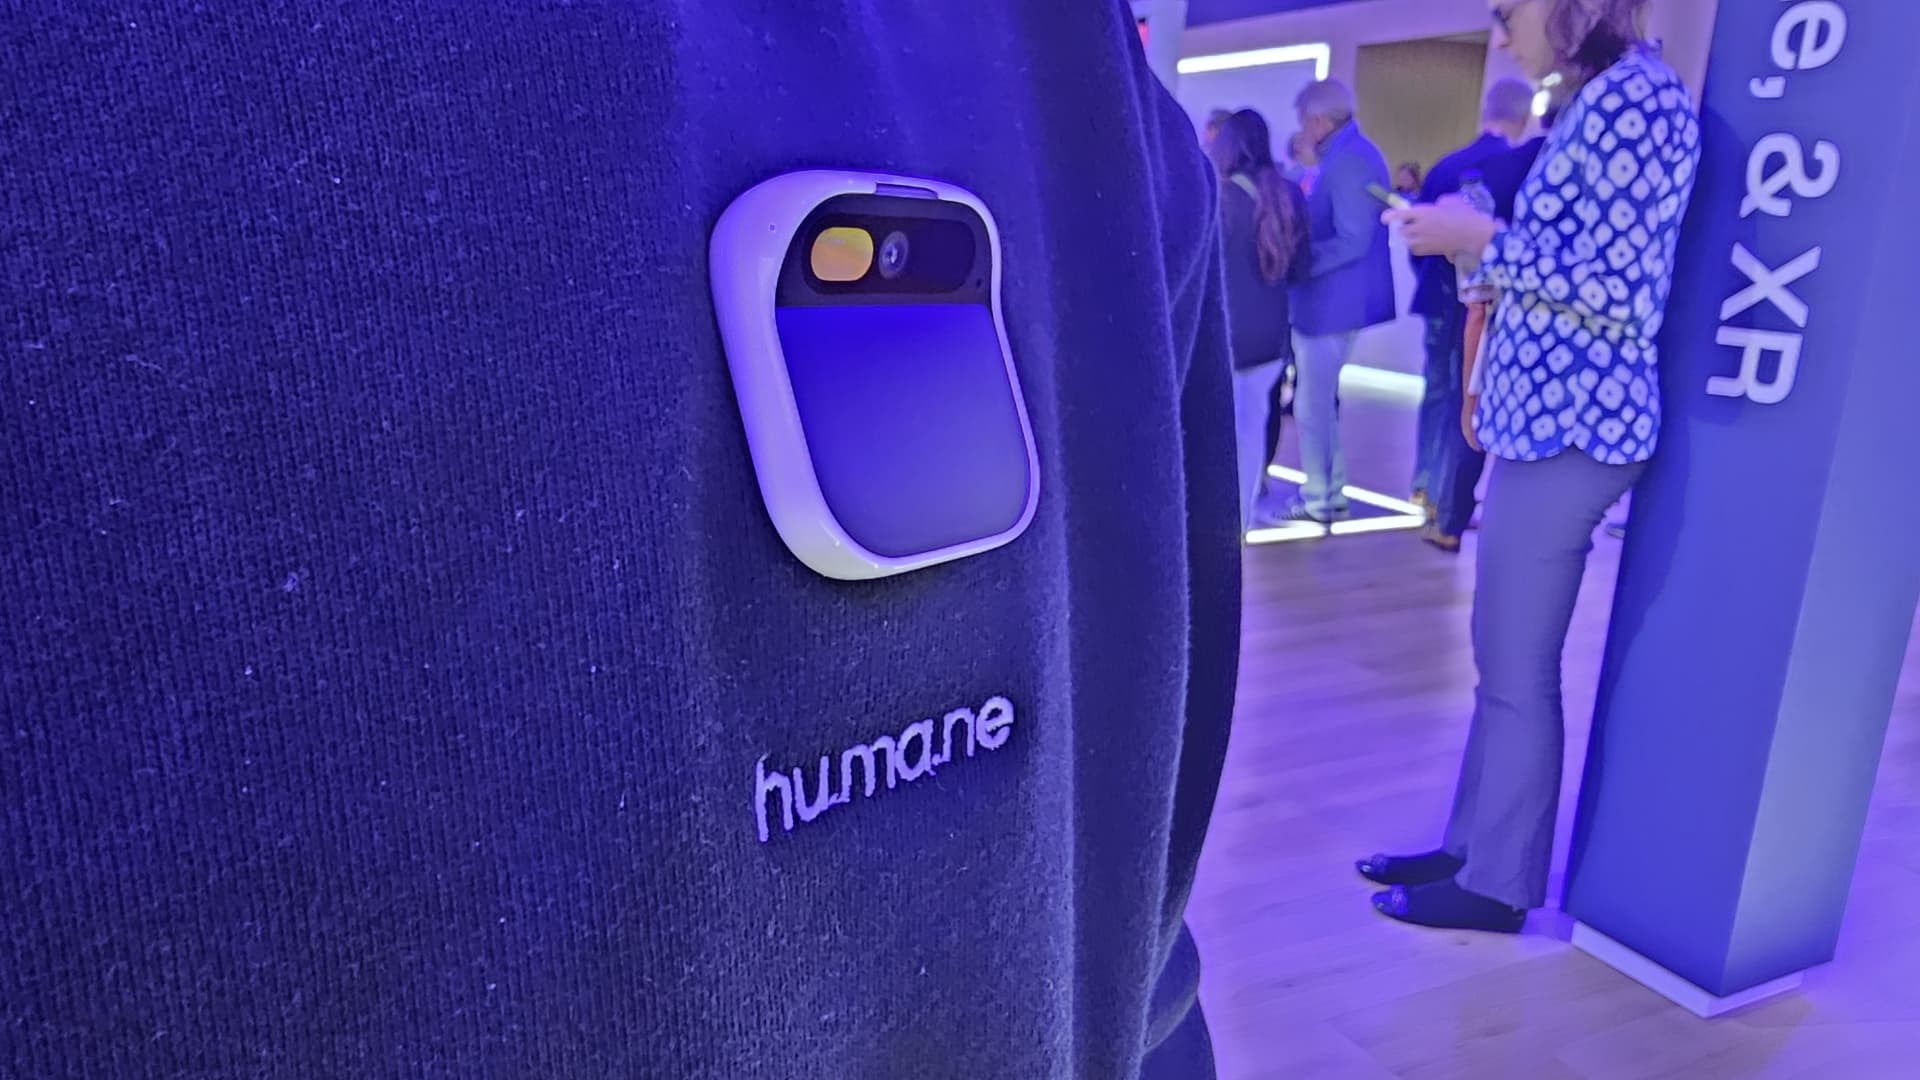 Humane's AI Pin is equipped with a voice assistant and camera.